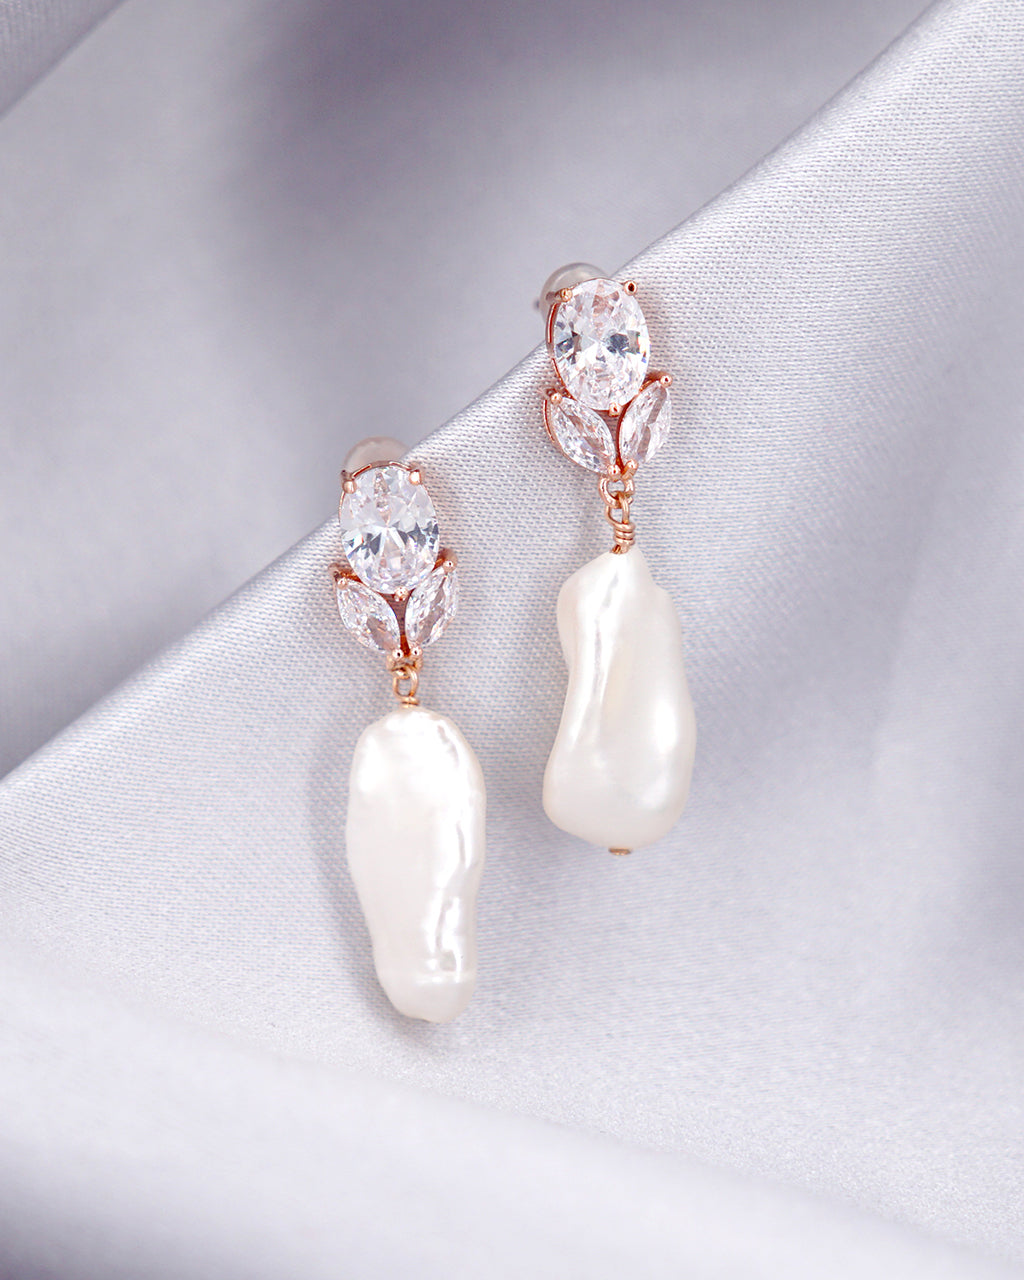 Oval Floral Earrings with Japanese Keshi Pearls